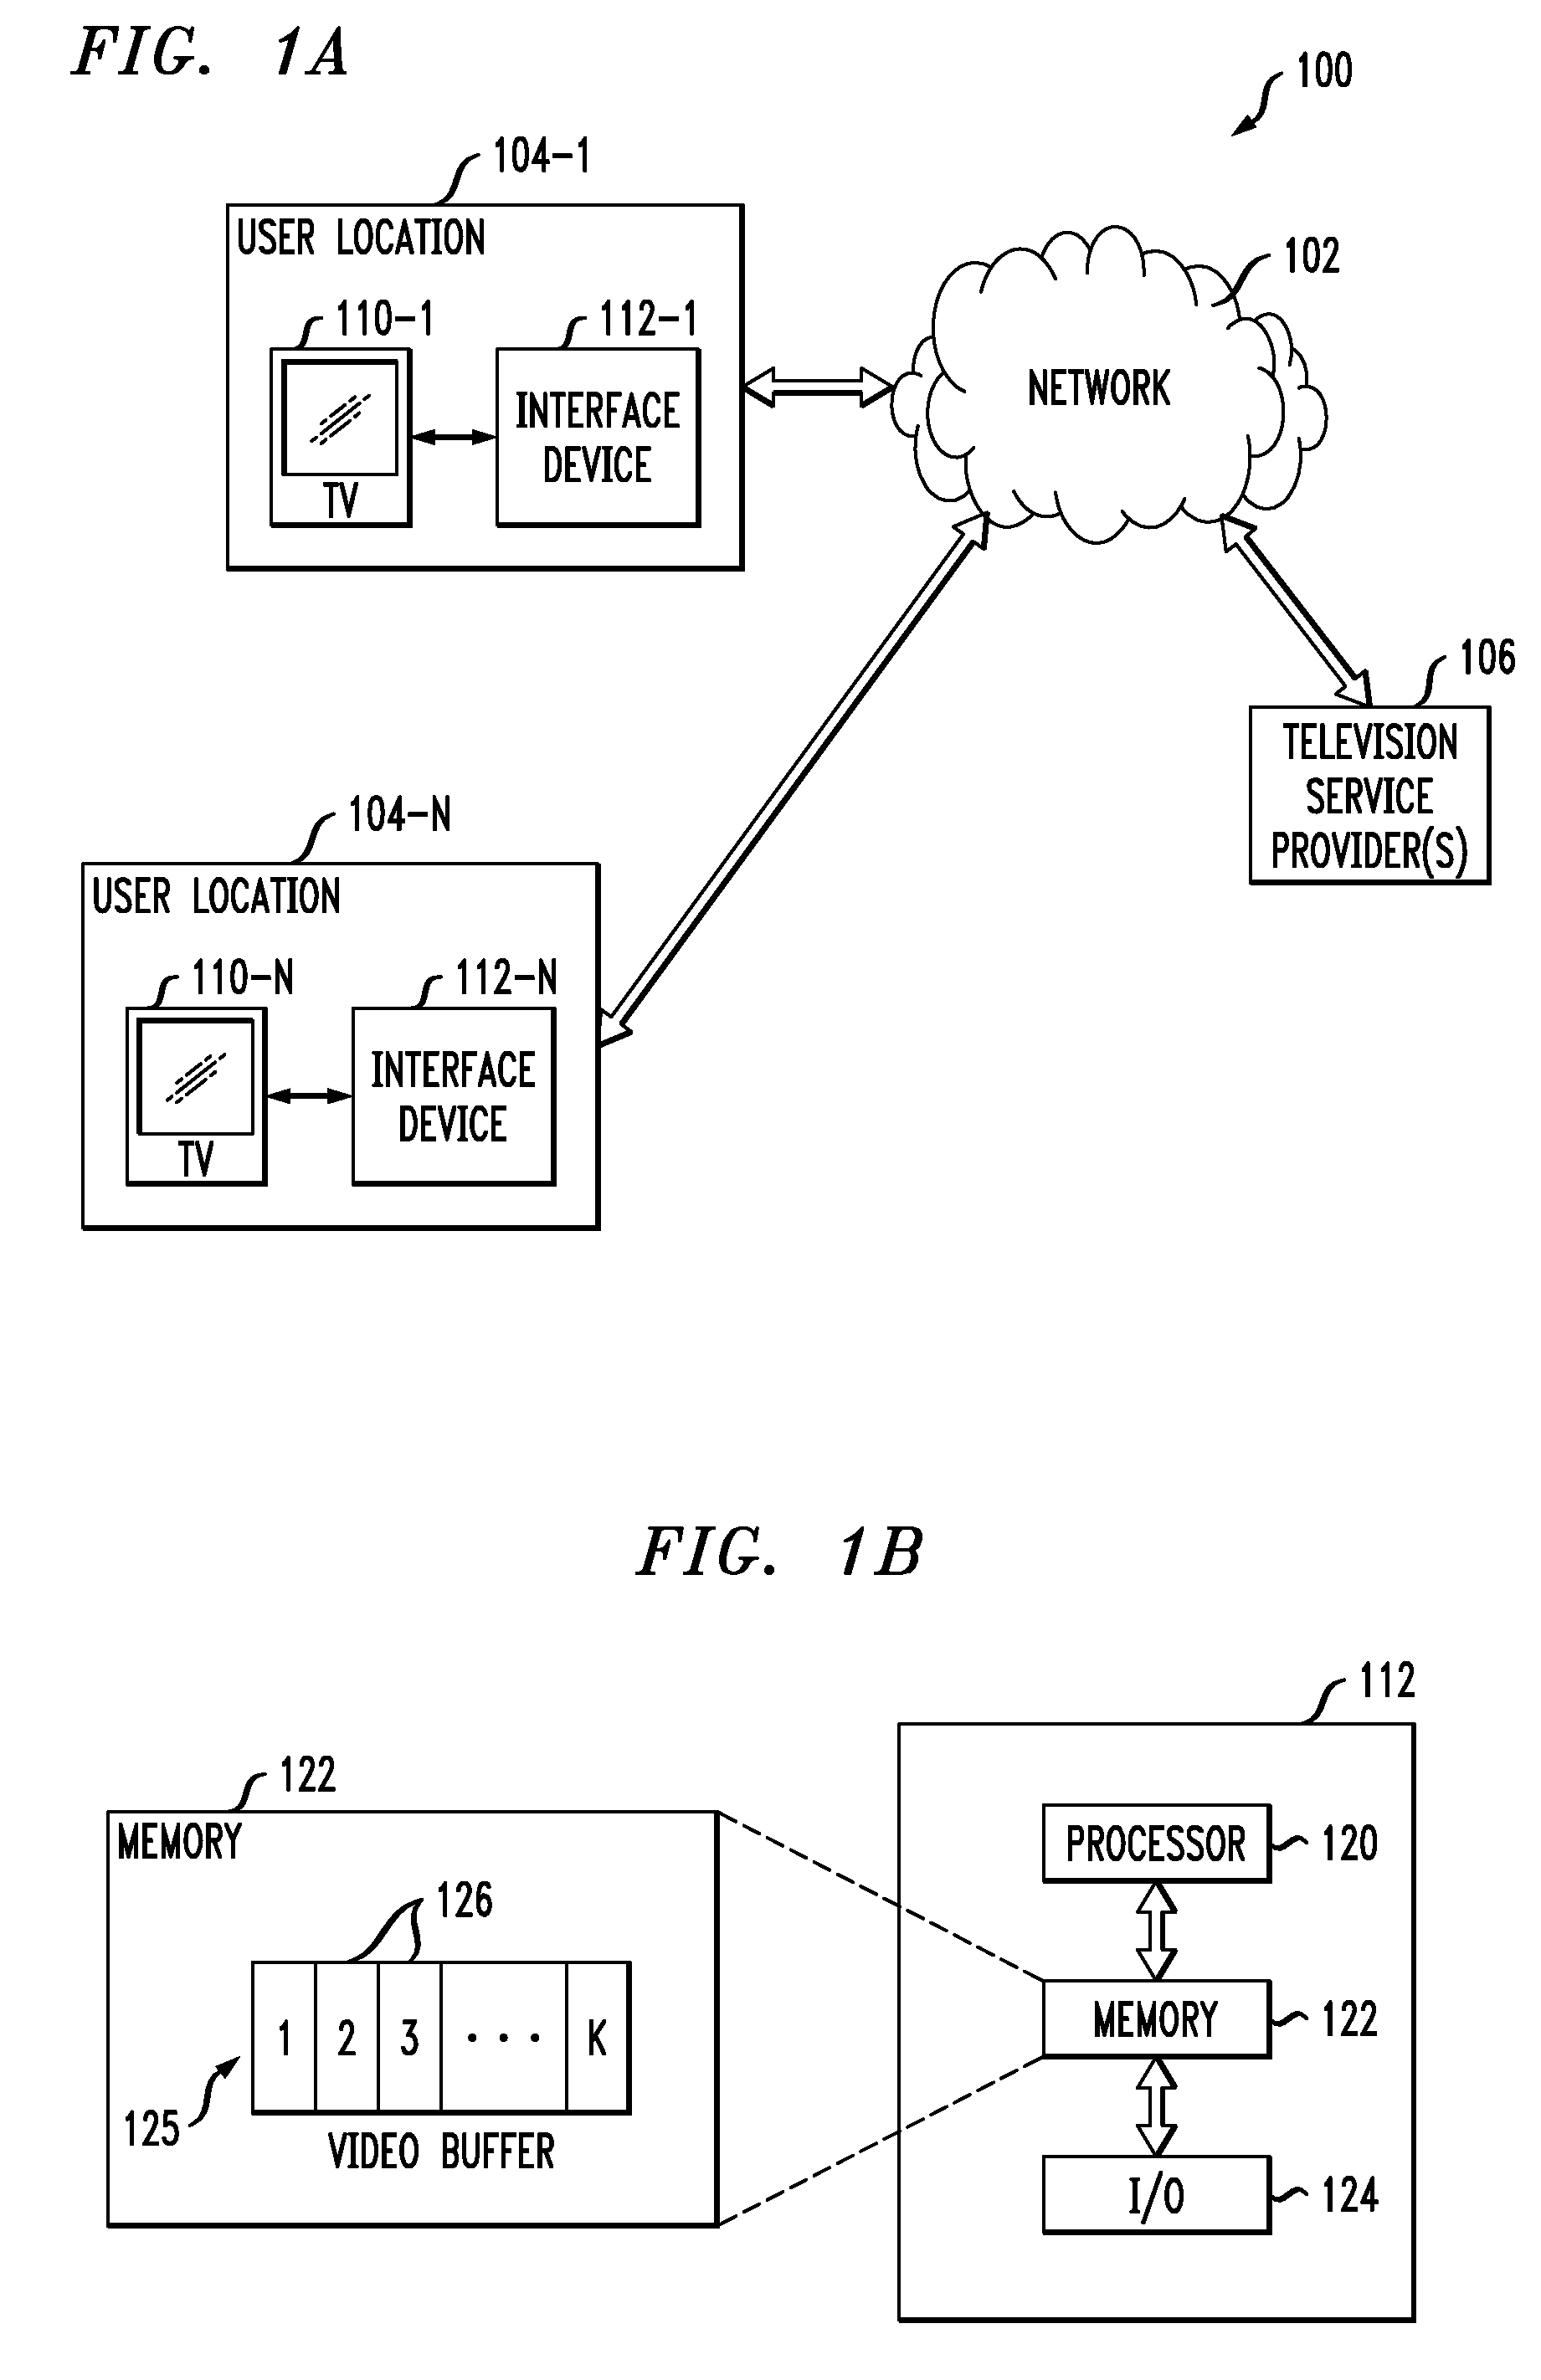 Interface Device Having Multiple Software Clients to Facilitate Display of Targeted Information